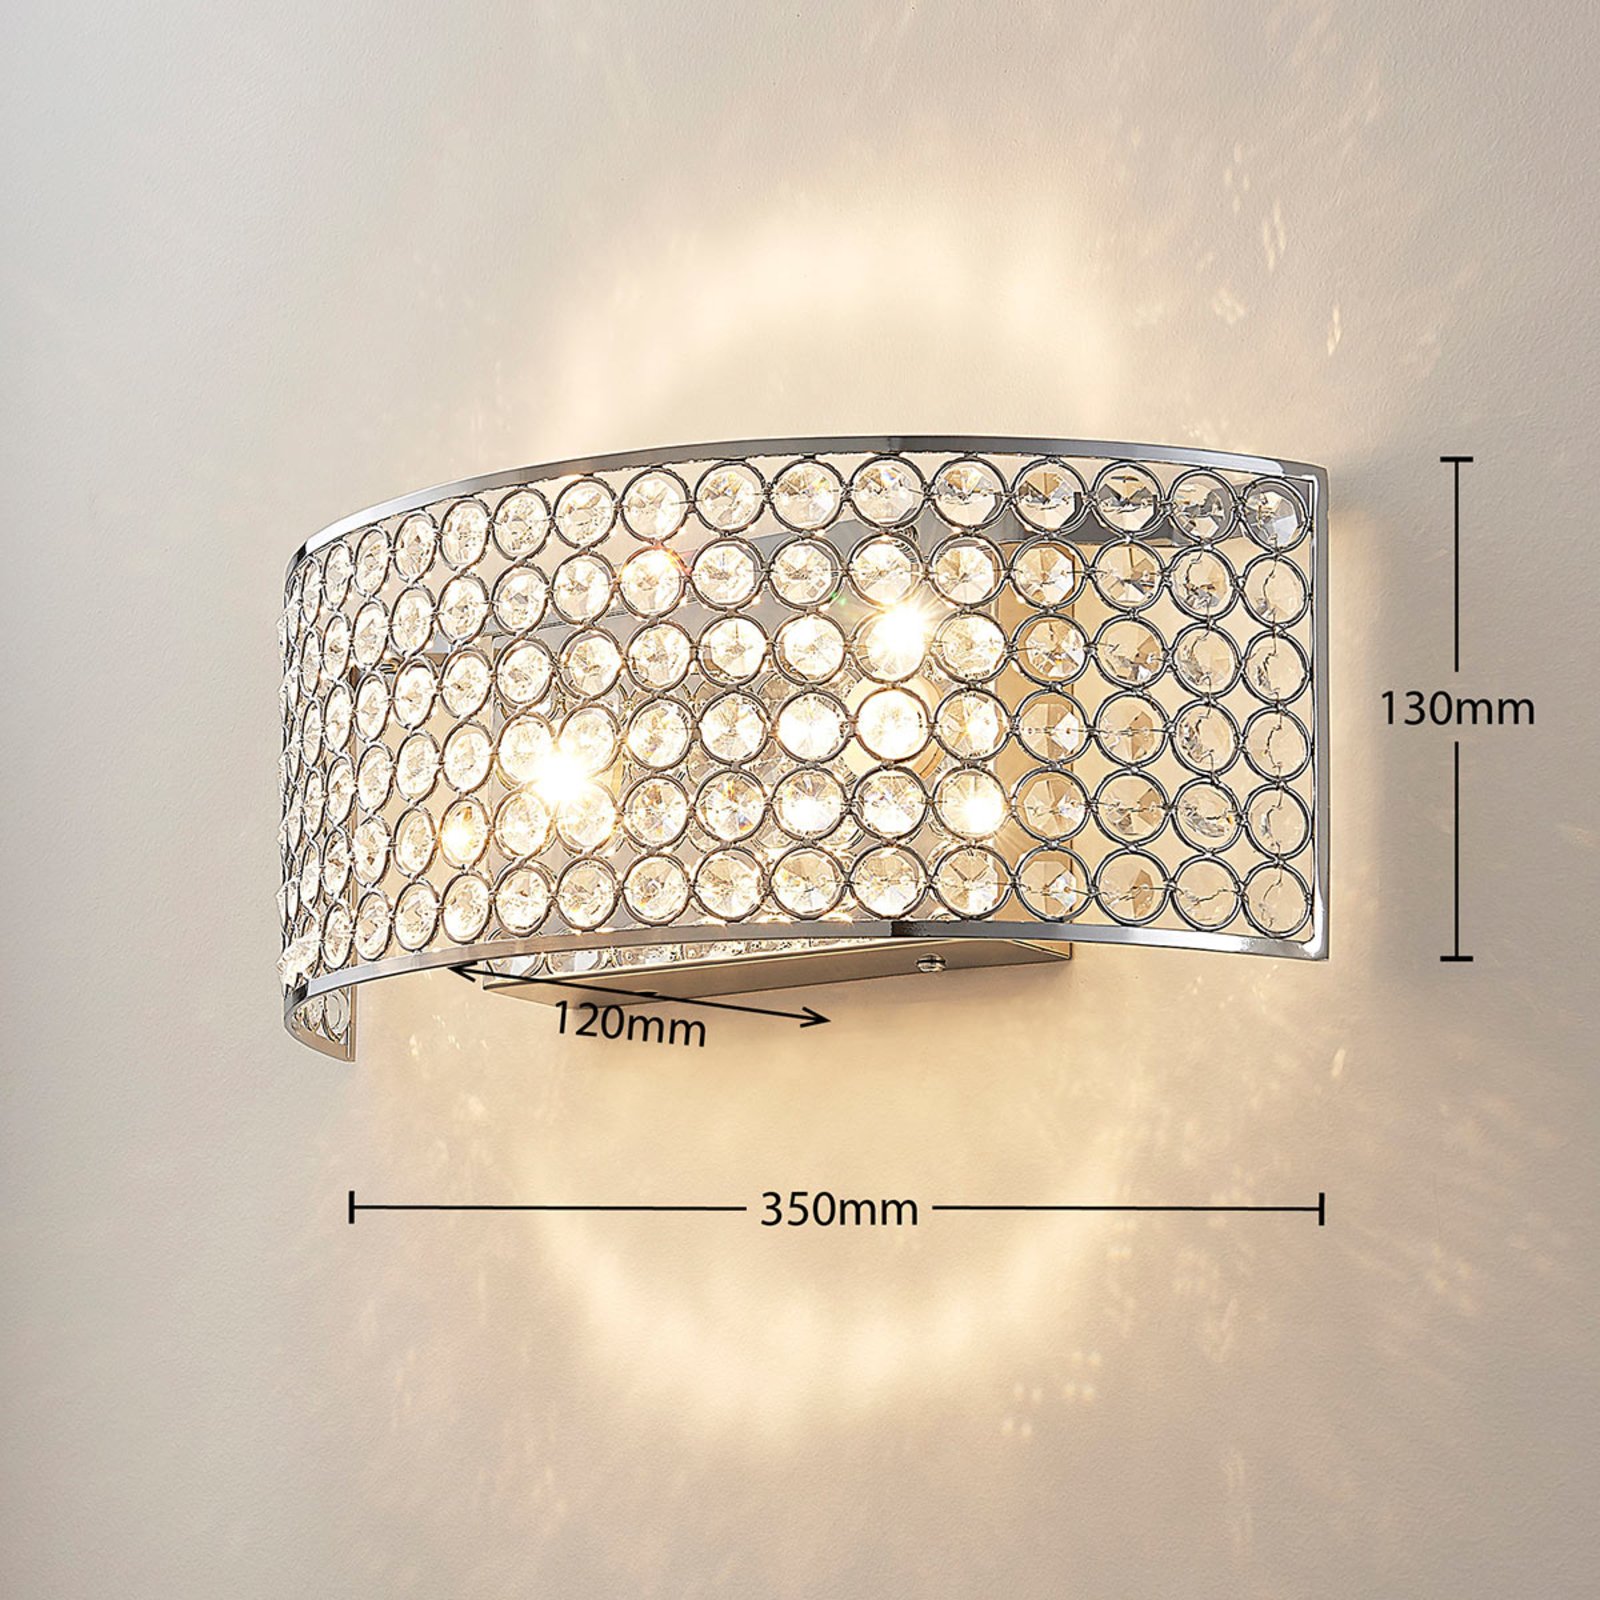 LED glass crystal wall light Alizee in chrome